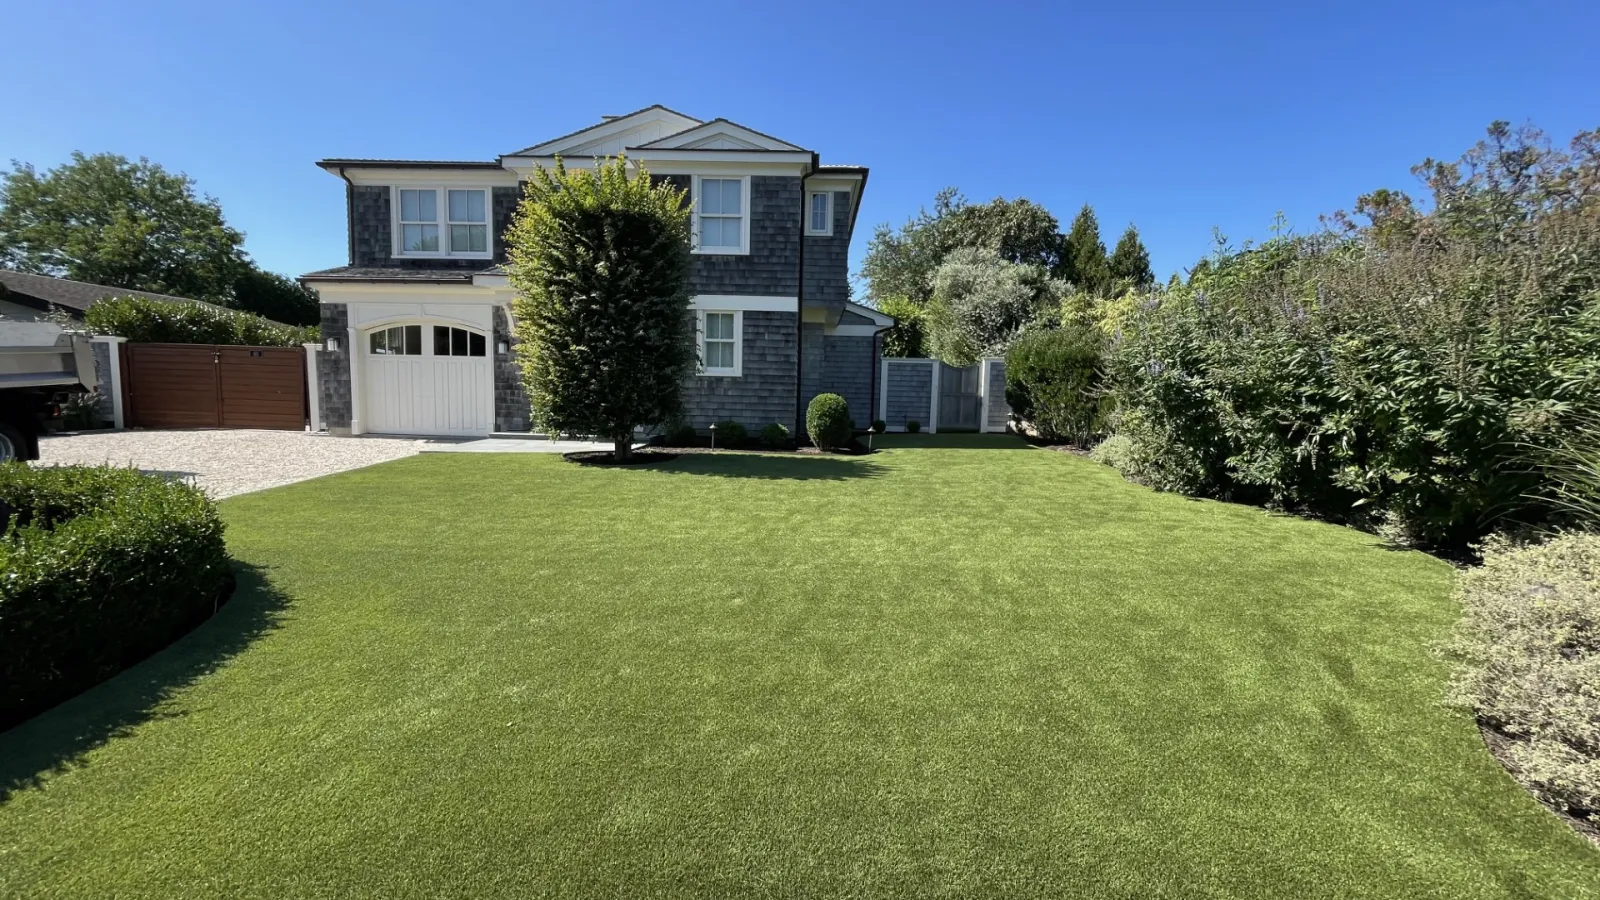 a house with a large lawn